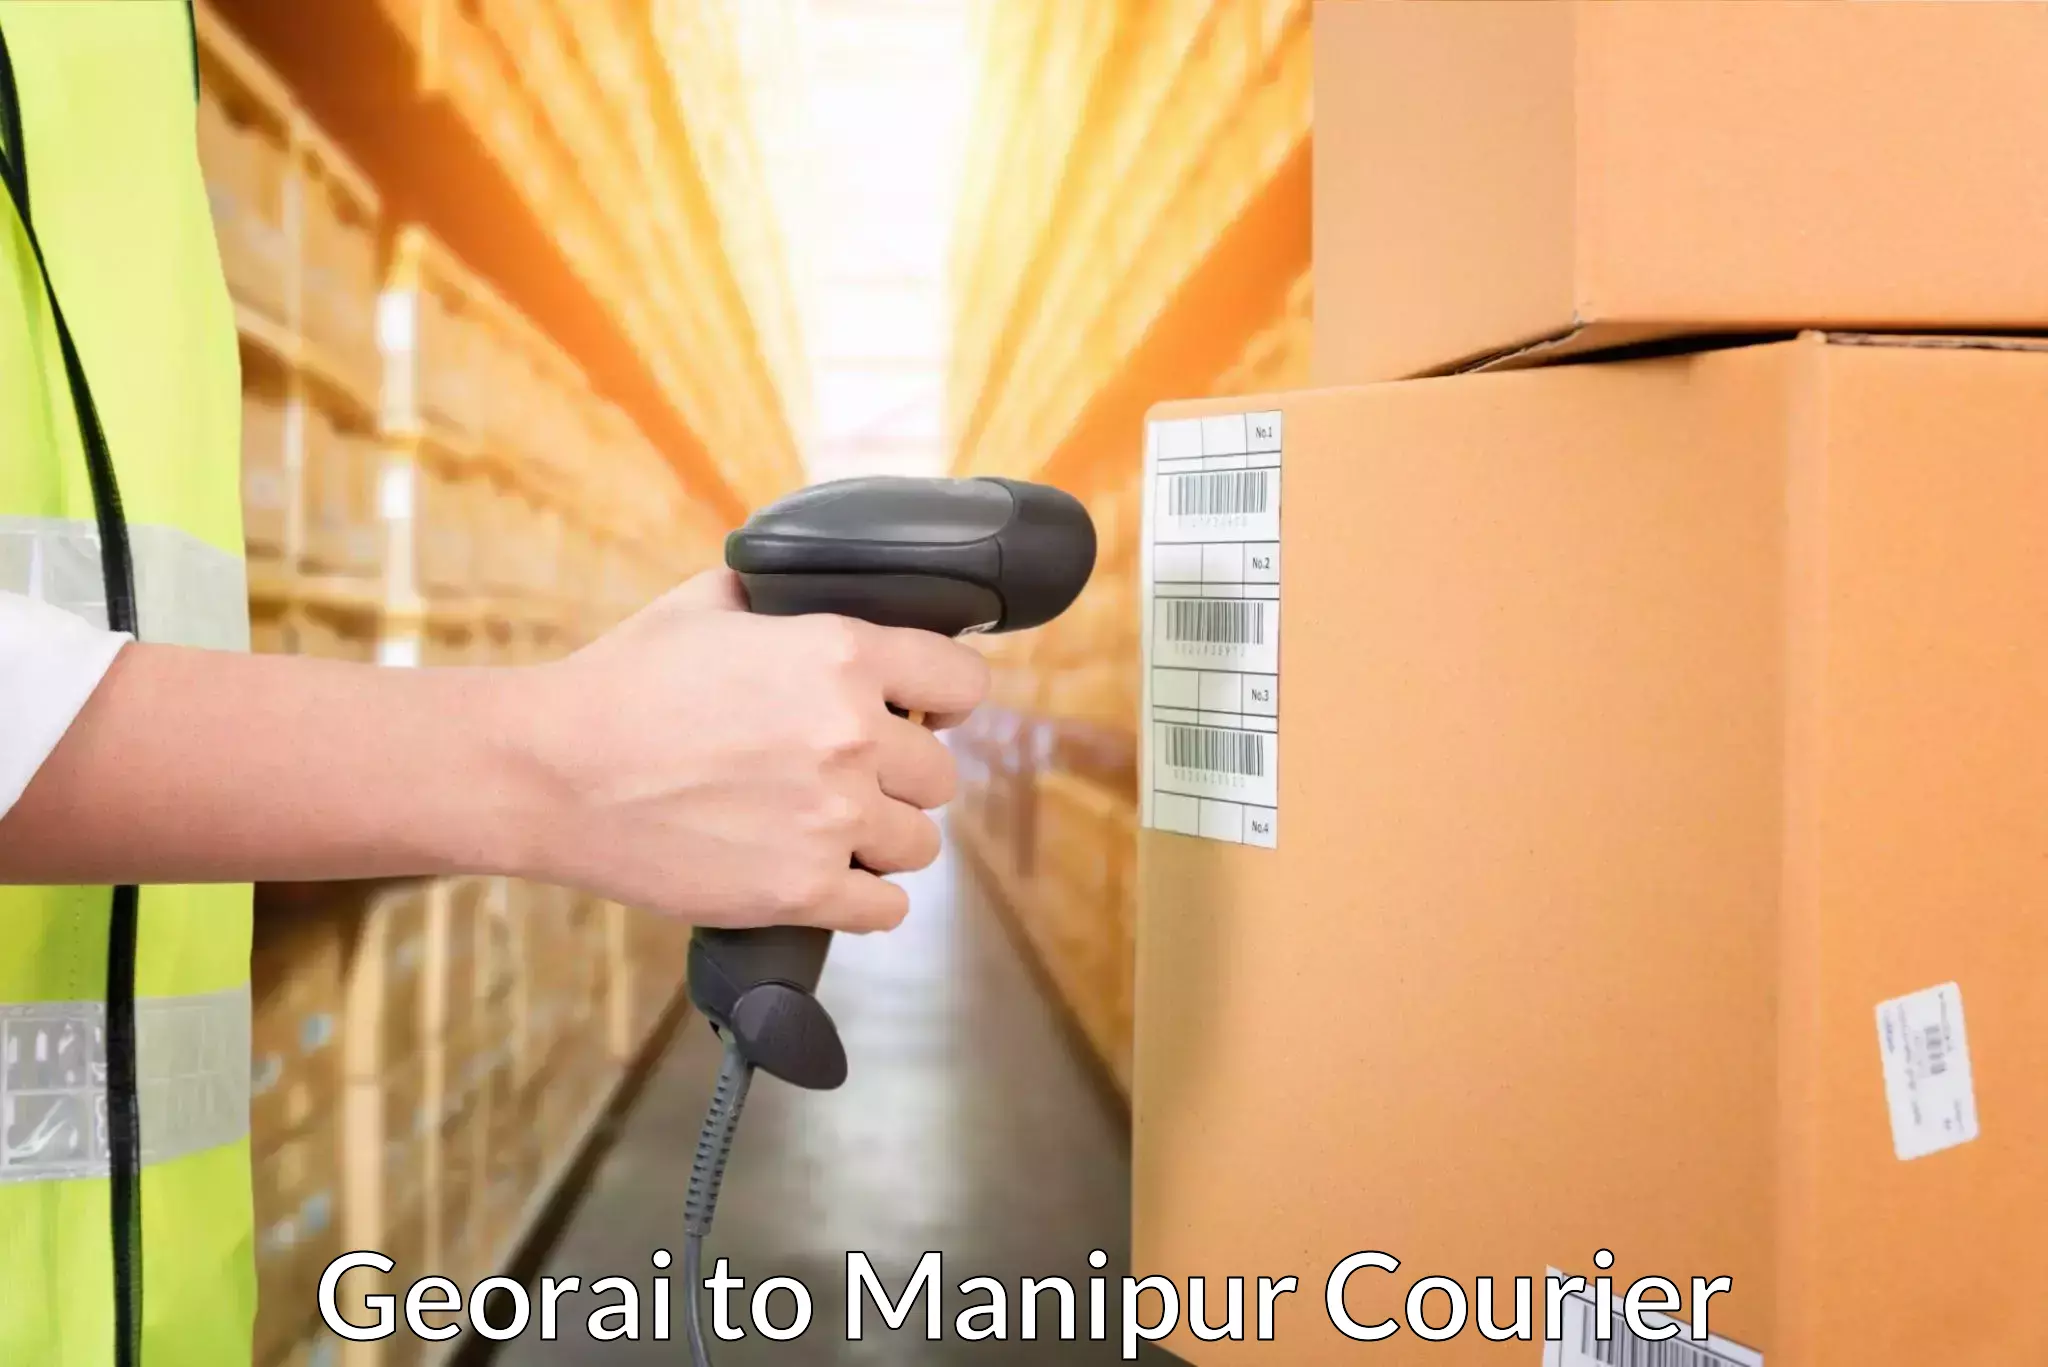 Nationwide courier service Georai to Manipur